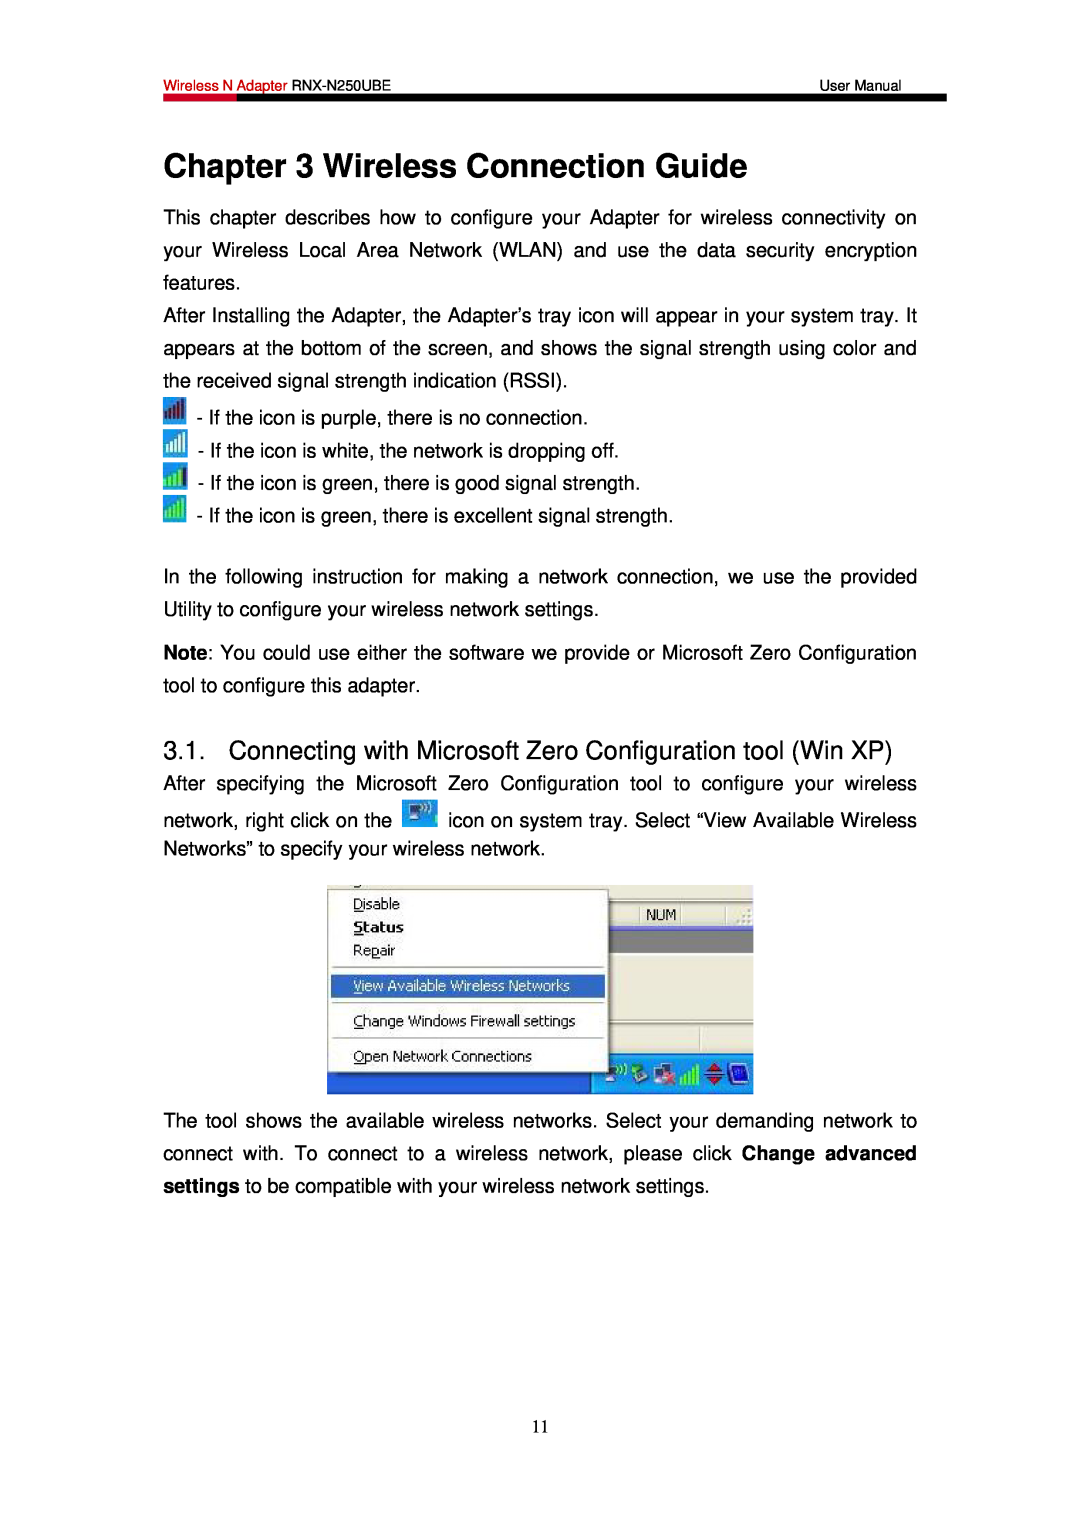 Rosewill RNX-N250UBE user manual Wireless Connection Guide, Connecting with Microsoft Zero Configuration tool Win XP 